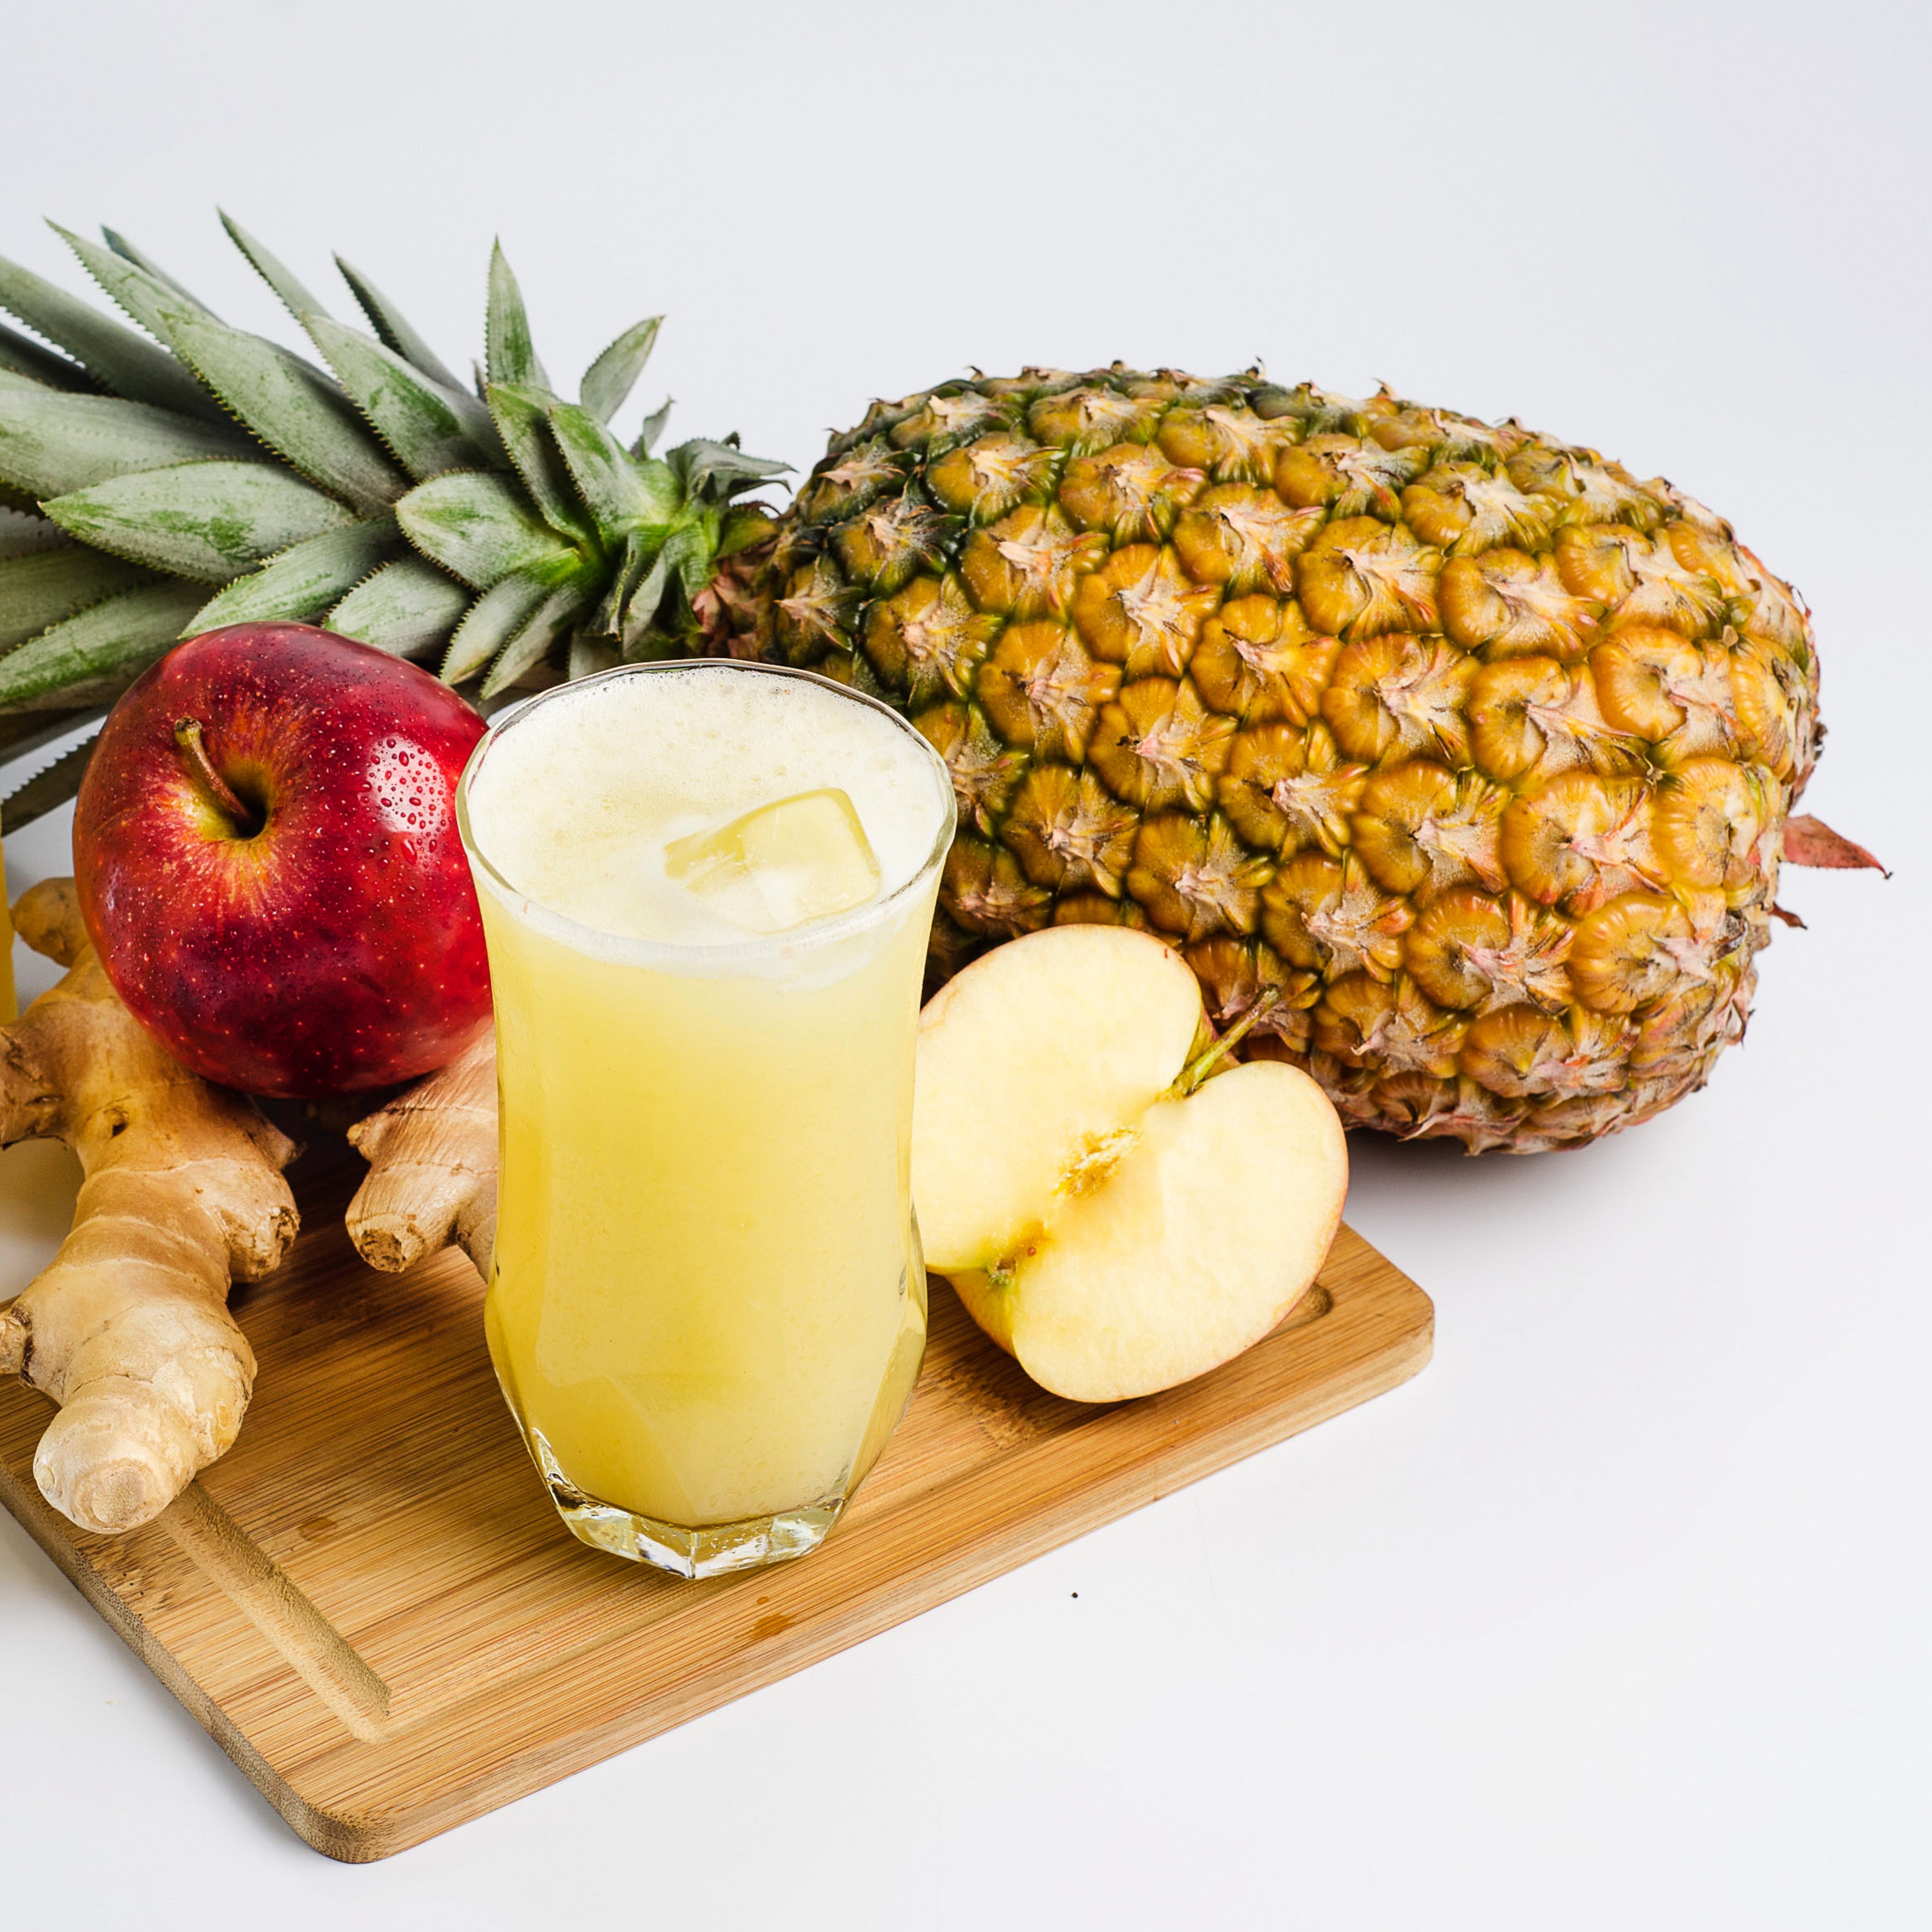 A Pineapple Ginger scented wax melt from Tuscany Candle® featuring the delightful aromas of pineapple, apple, and ginger on a cutting board.